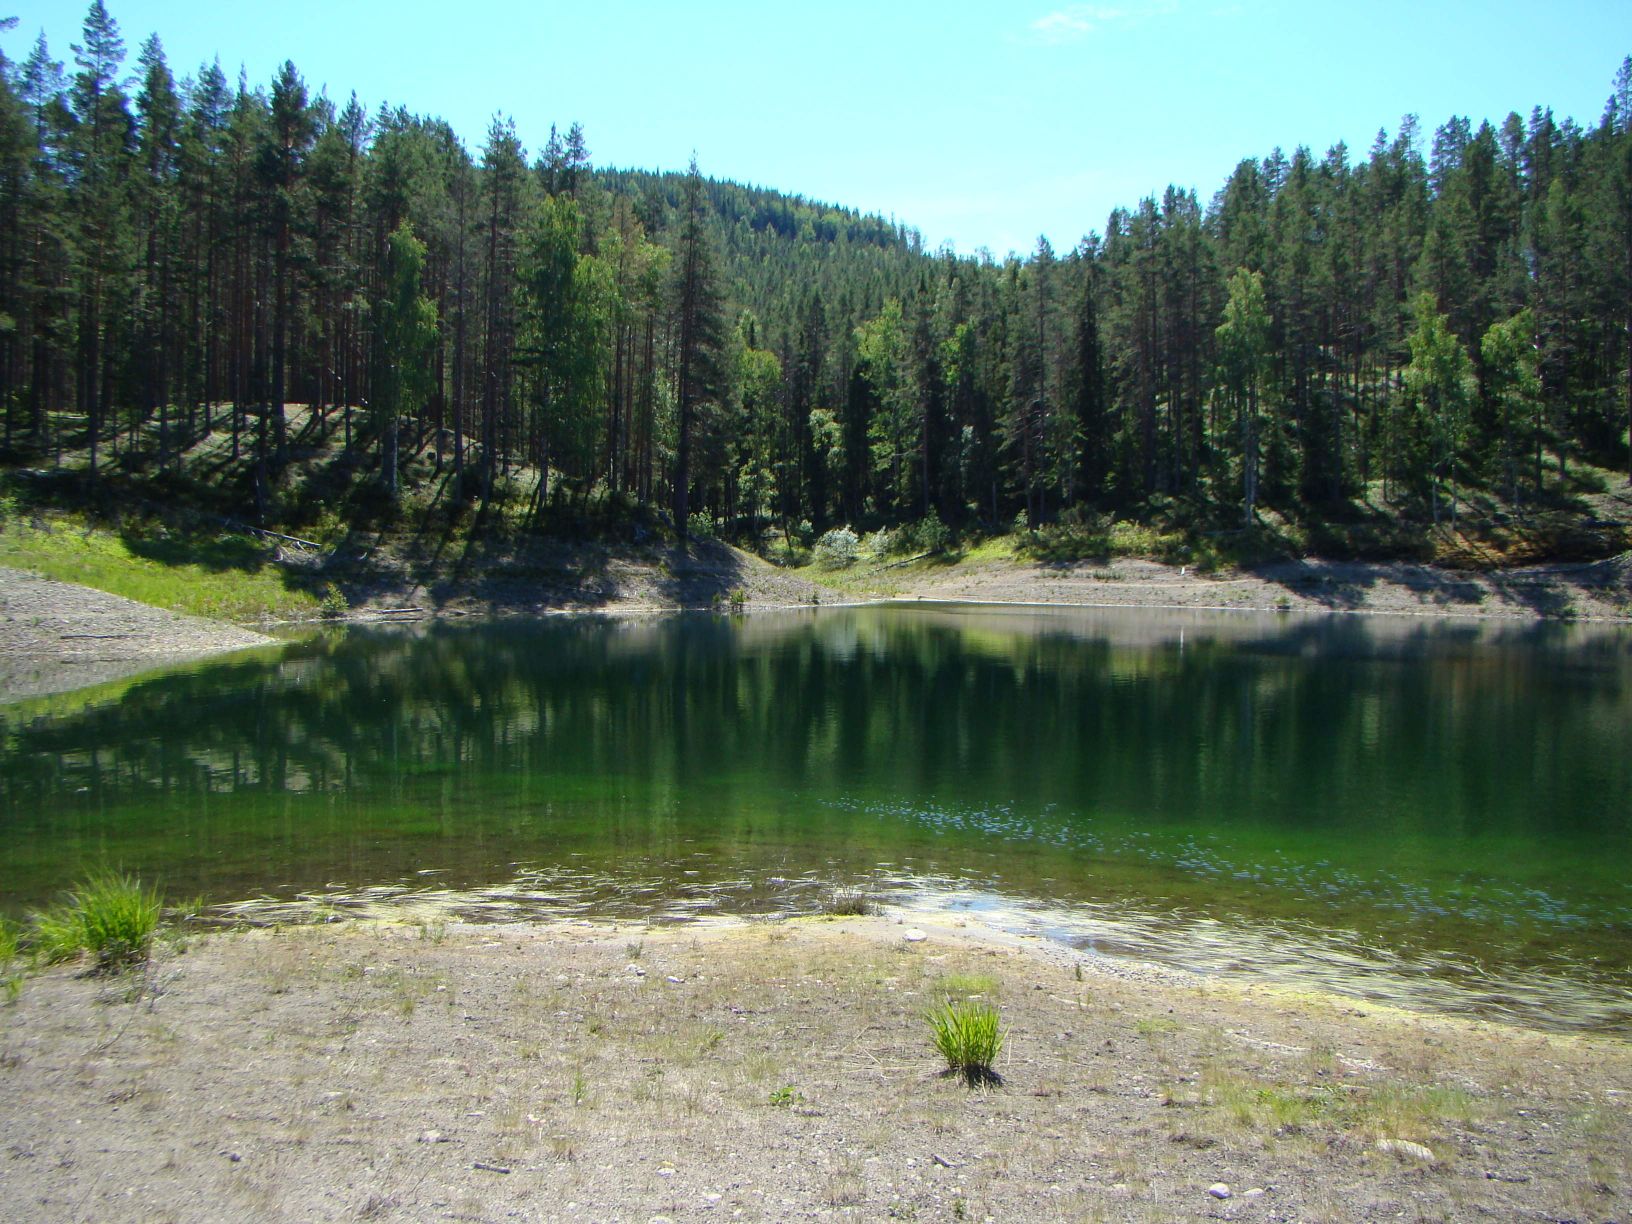 A green lake deep in the forest of pines and spruces.